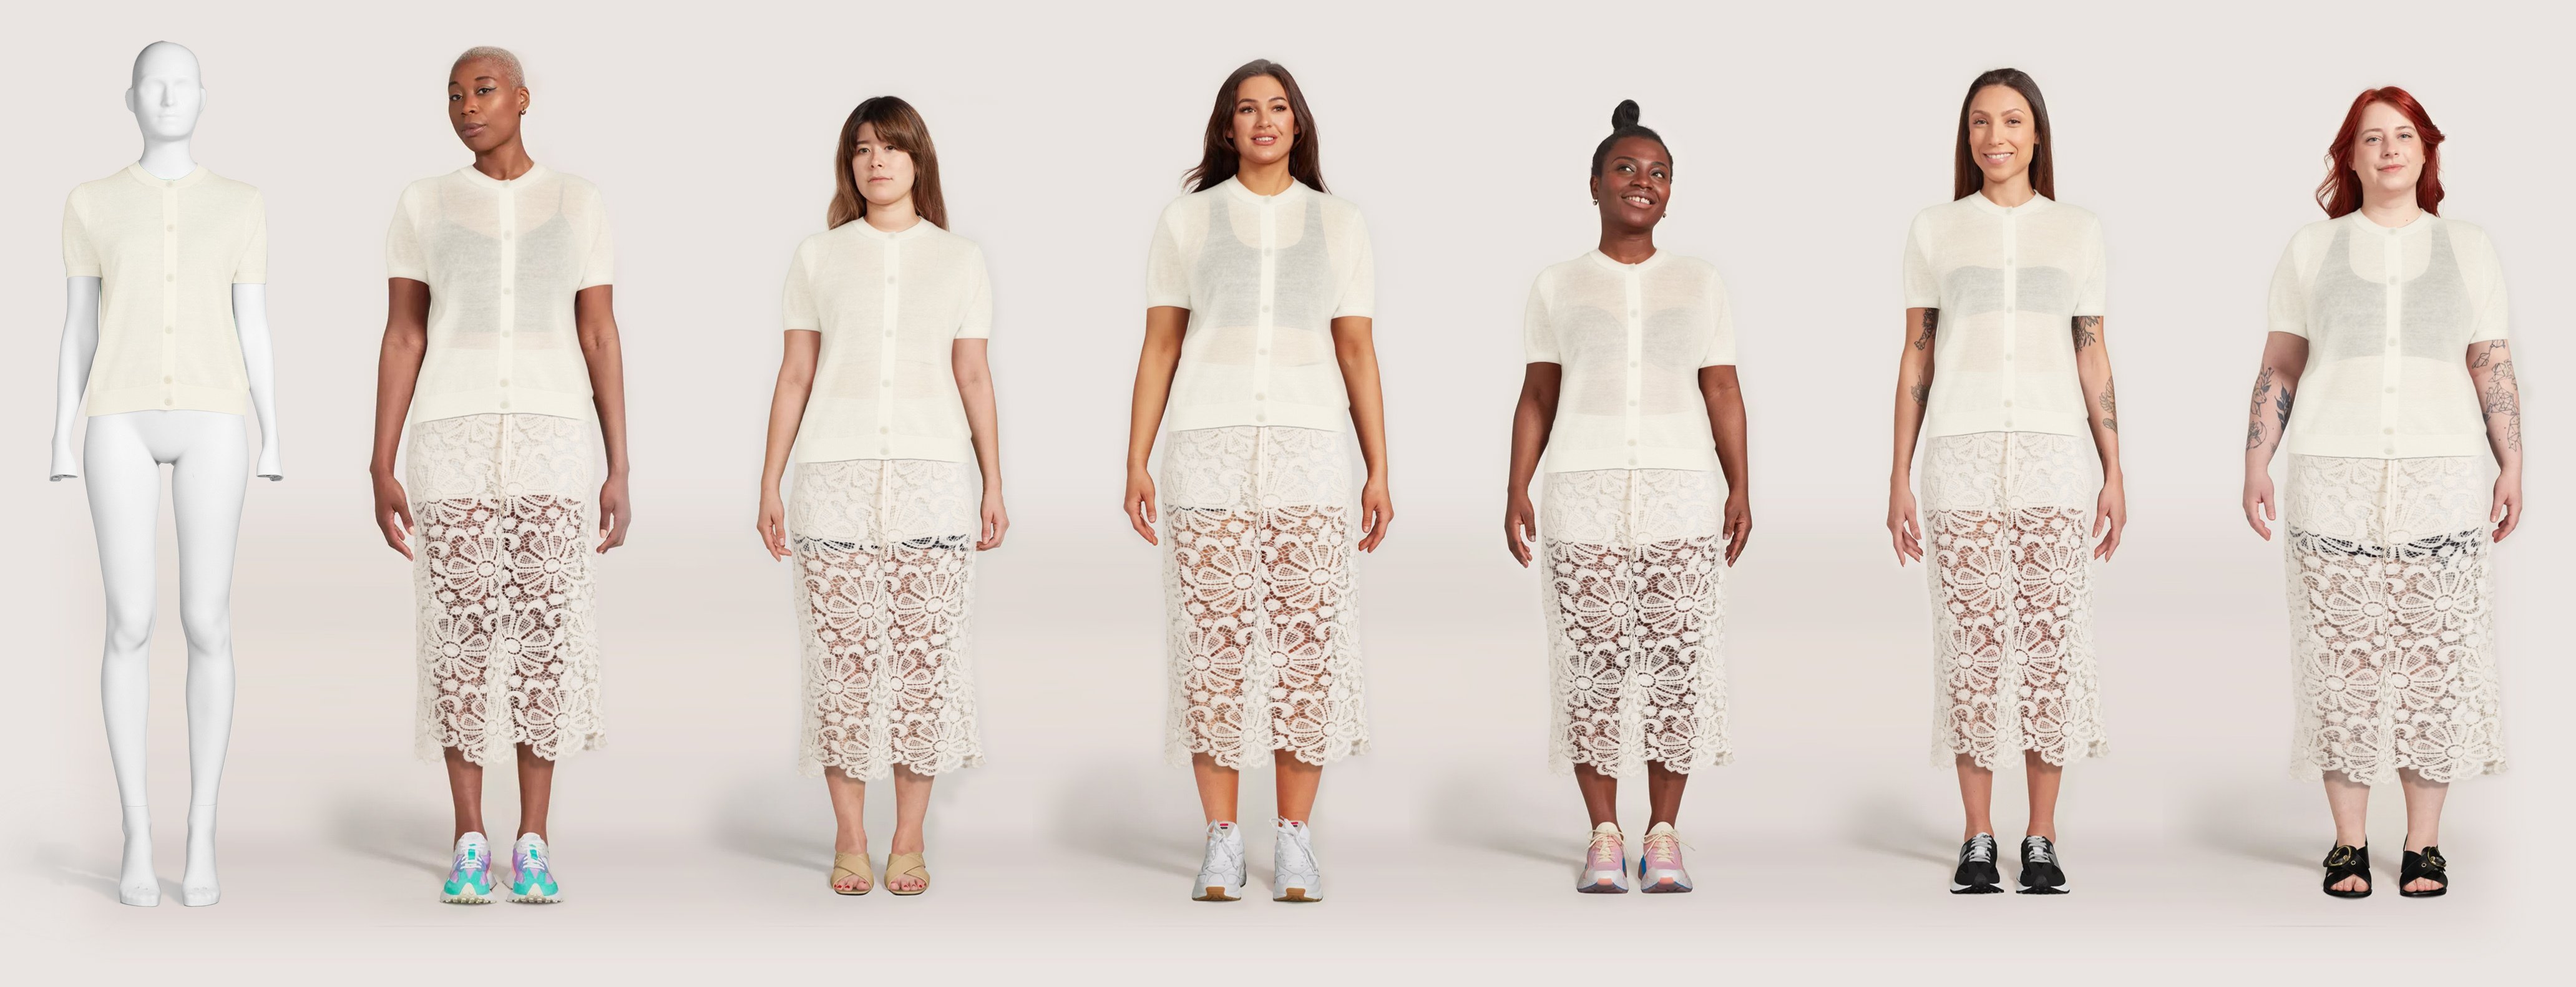 One mannequin and six real customers wearing white/cream top in multiple sizes